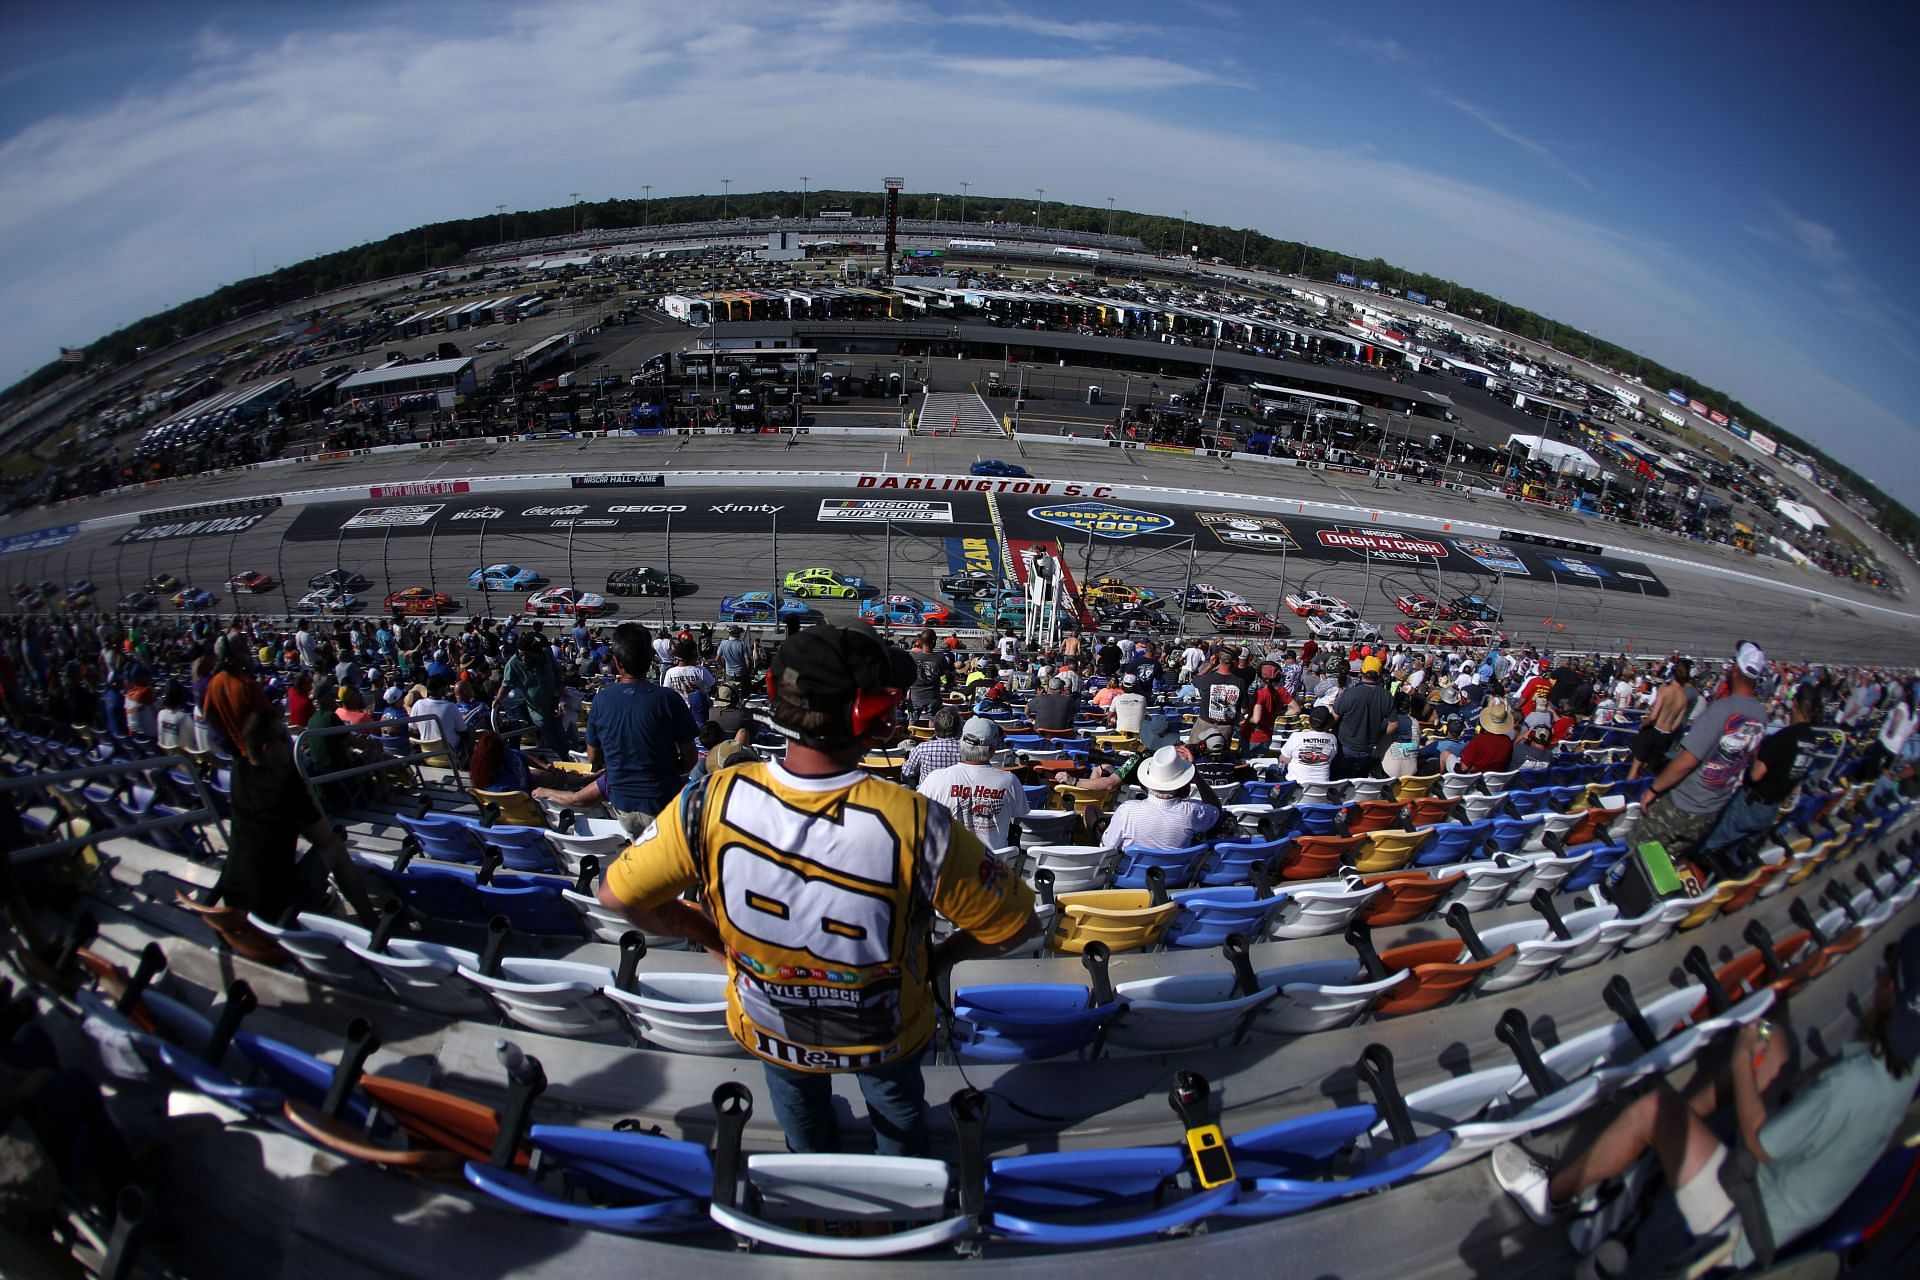 NASCAR fans look on during the NASCAR Cup Series Goodyear 400 at Darlington Raceway (Photo by Sean Gardner/Getty Images)